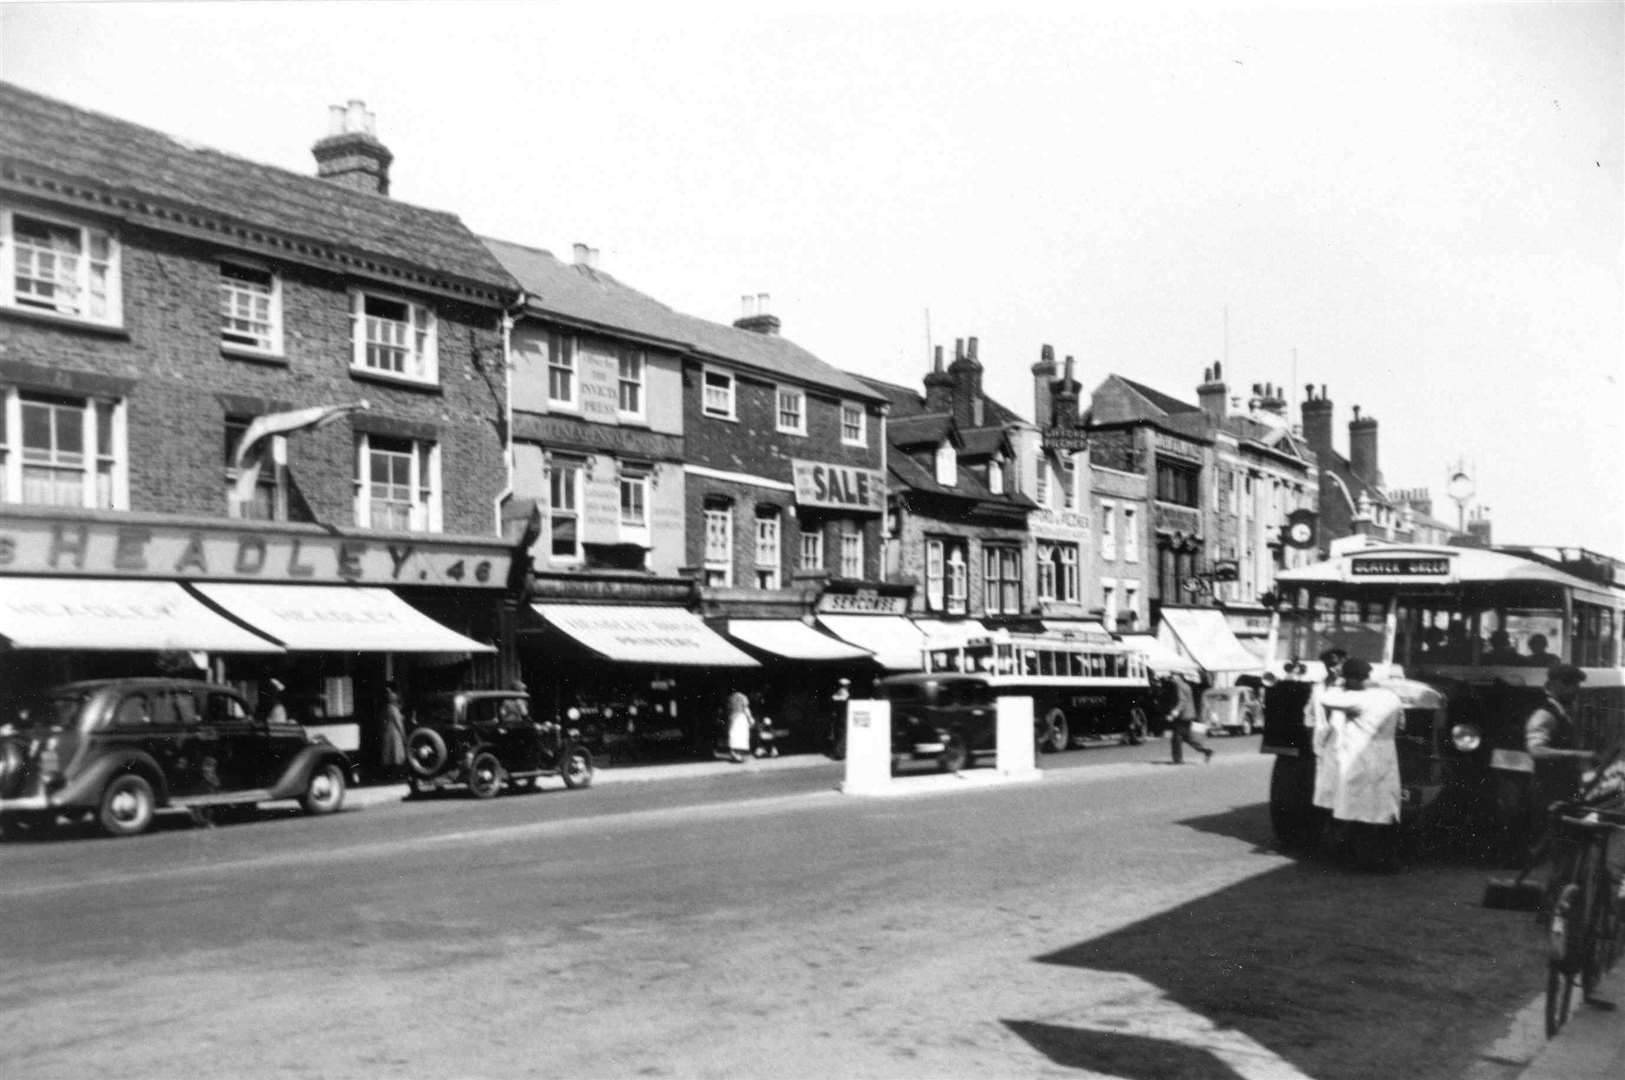 The Lower High Street in the 1930s long before the cobbles were installed